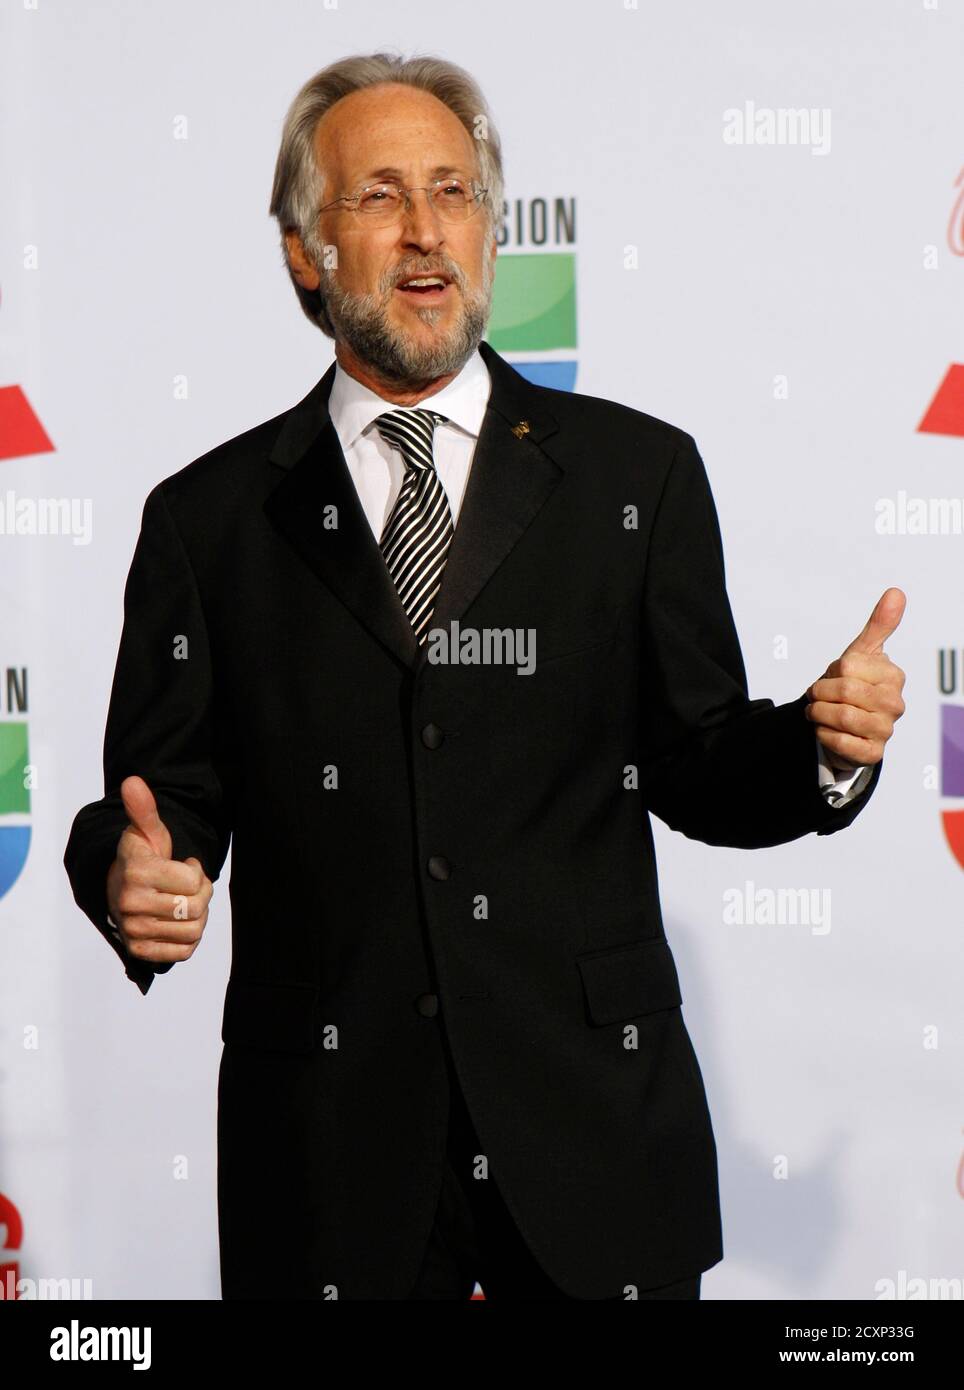 Neil Portnow, president of the National Academy of Recording Arts and Sciences (NARAS), arrives at the 12th annual Latin Grammy Awards in Las Vegas, Nevada November 10, 2011.    REUTERS/Steve Marcus (UNITED STATES - Tags: ENTERTAINMENT) (LATINGRAMMYS-ARRIVALS) Stock Photo